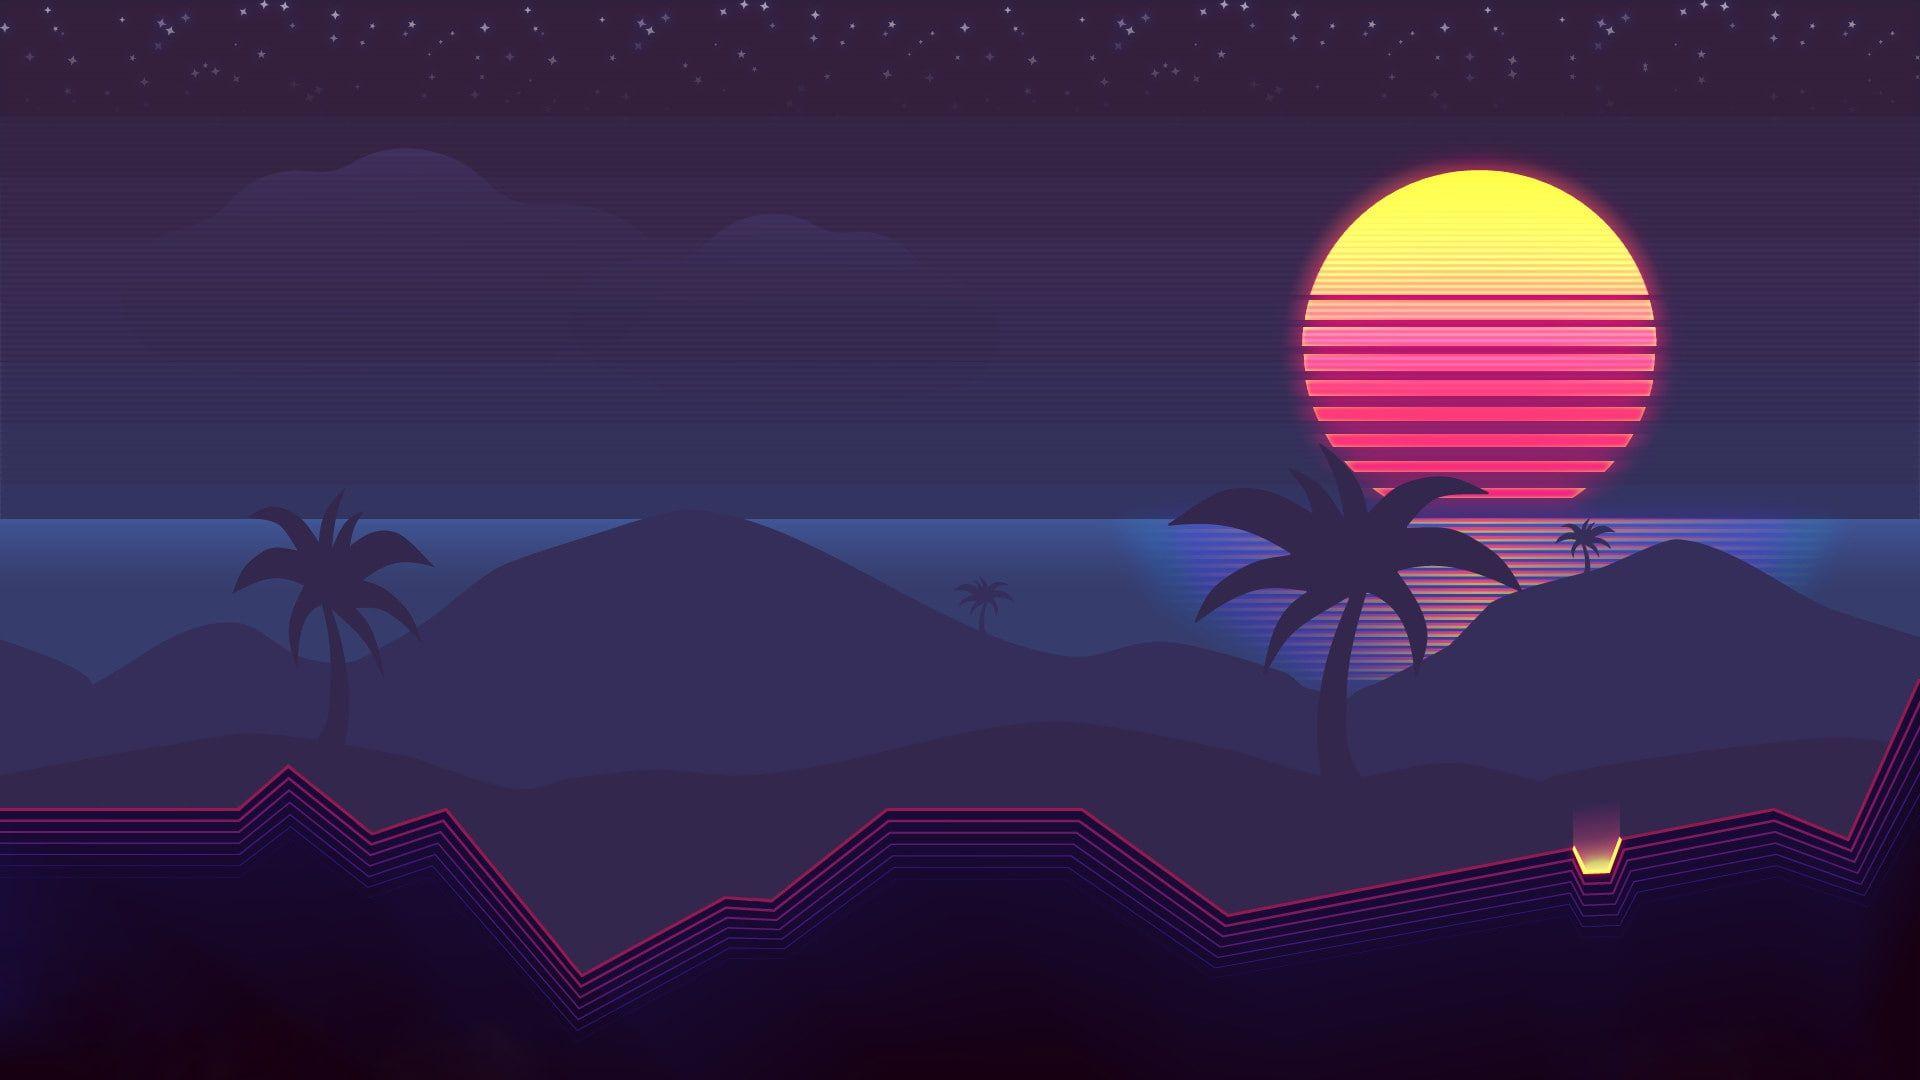 The sun #Music Palm trees #Background s #Neon 's #Synth #Retrowave #Synthwave New Retro Wave #Futures. Neon wallpaper, Vaporwave wallpaper, Heaven wallpaper